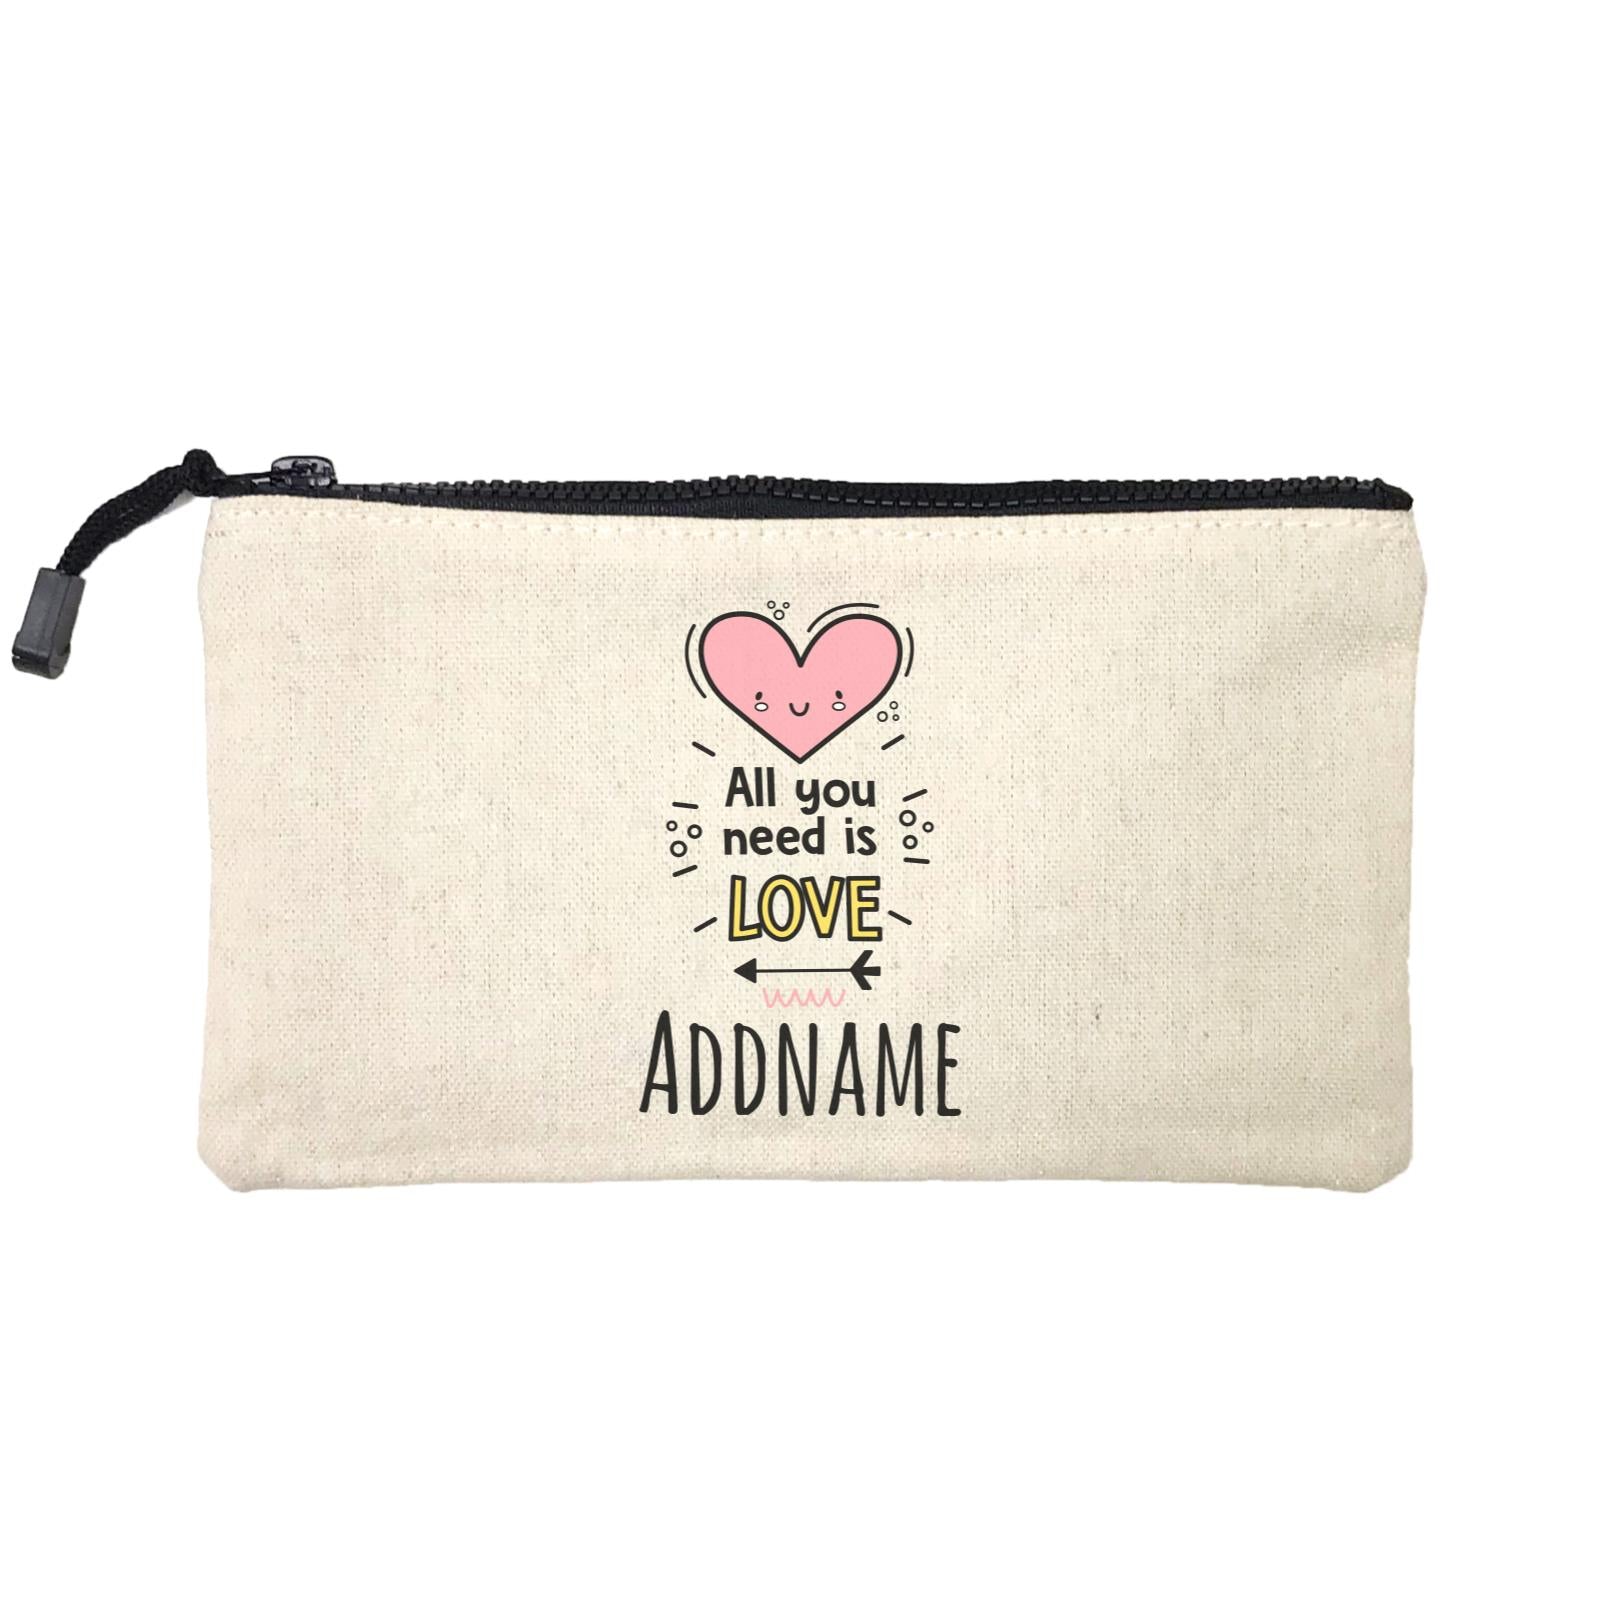 Drawn Baby Elements All You Need Is Love Addname Mini Accessories Stationery Pouch